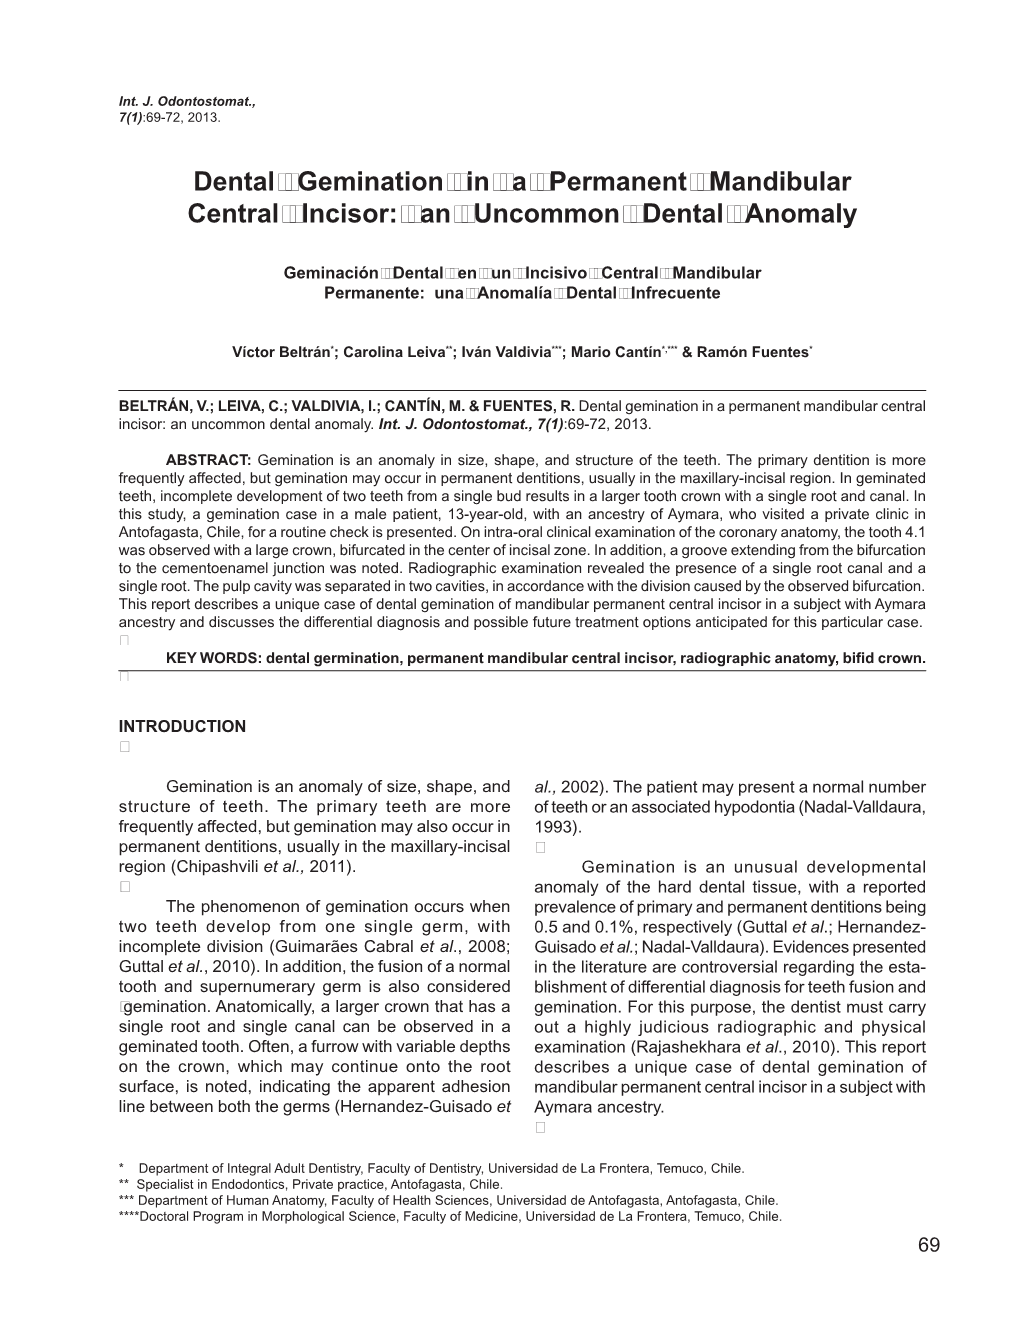 Dental Gemination in a Permanent Mandibular Central Incisor: an Uncommon Dental Anomaly